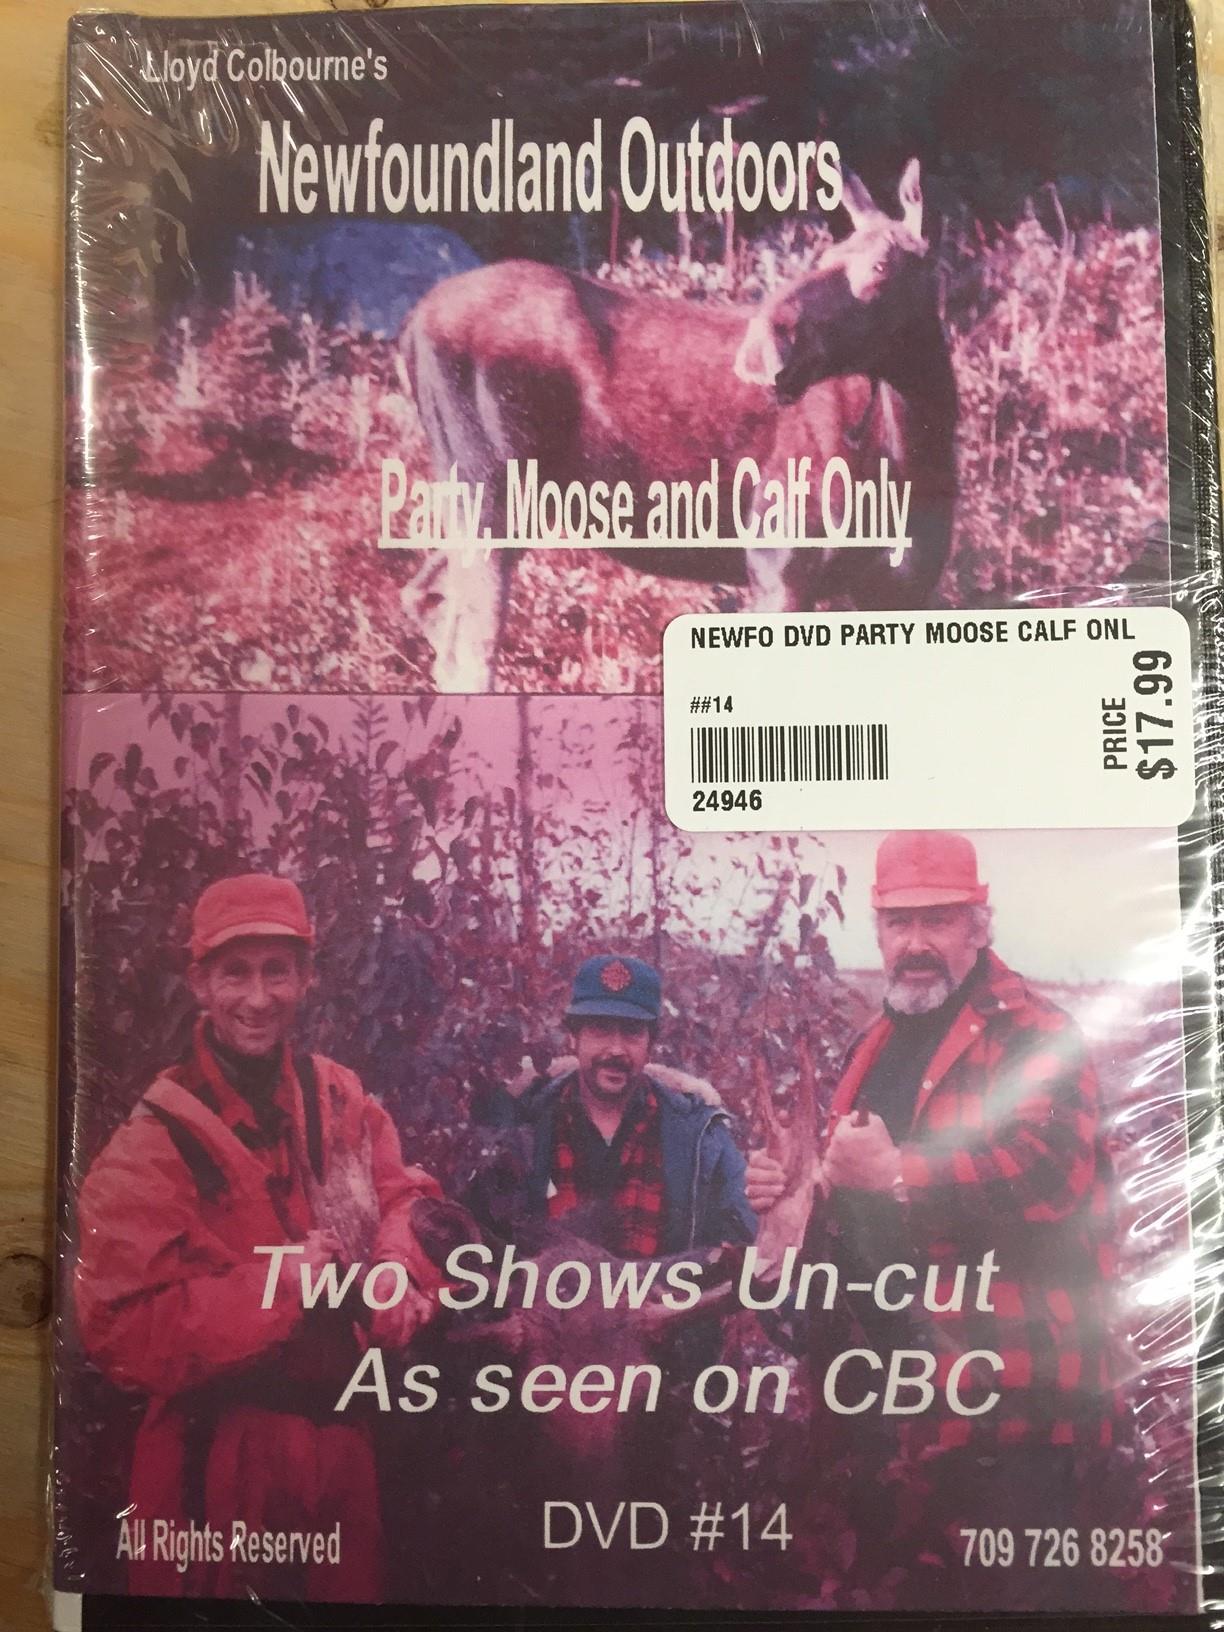 Newfoundland Outdoors - Lloyd Colbourne - Party Moose and Calf Only